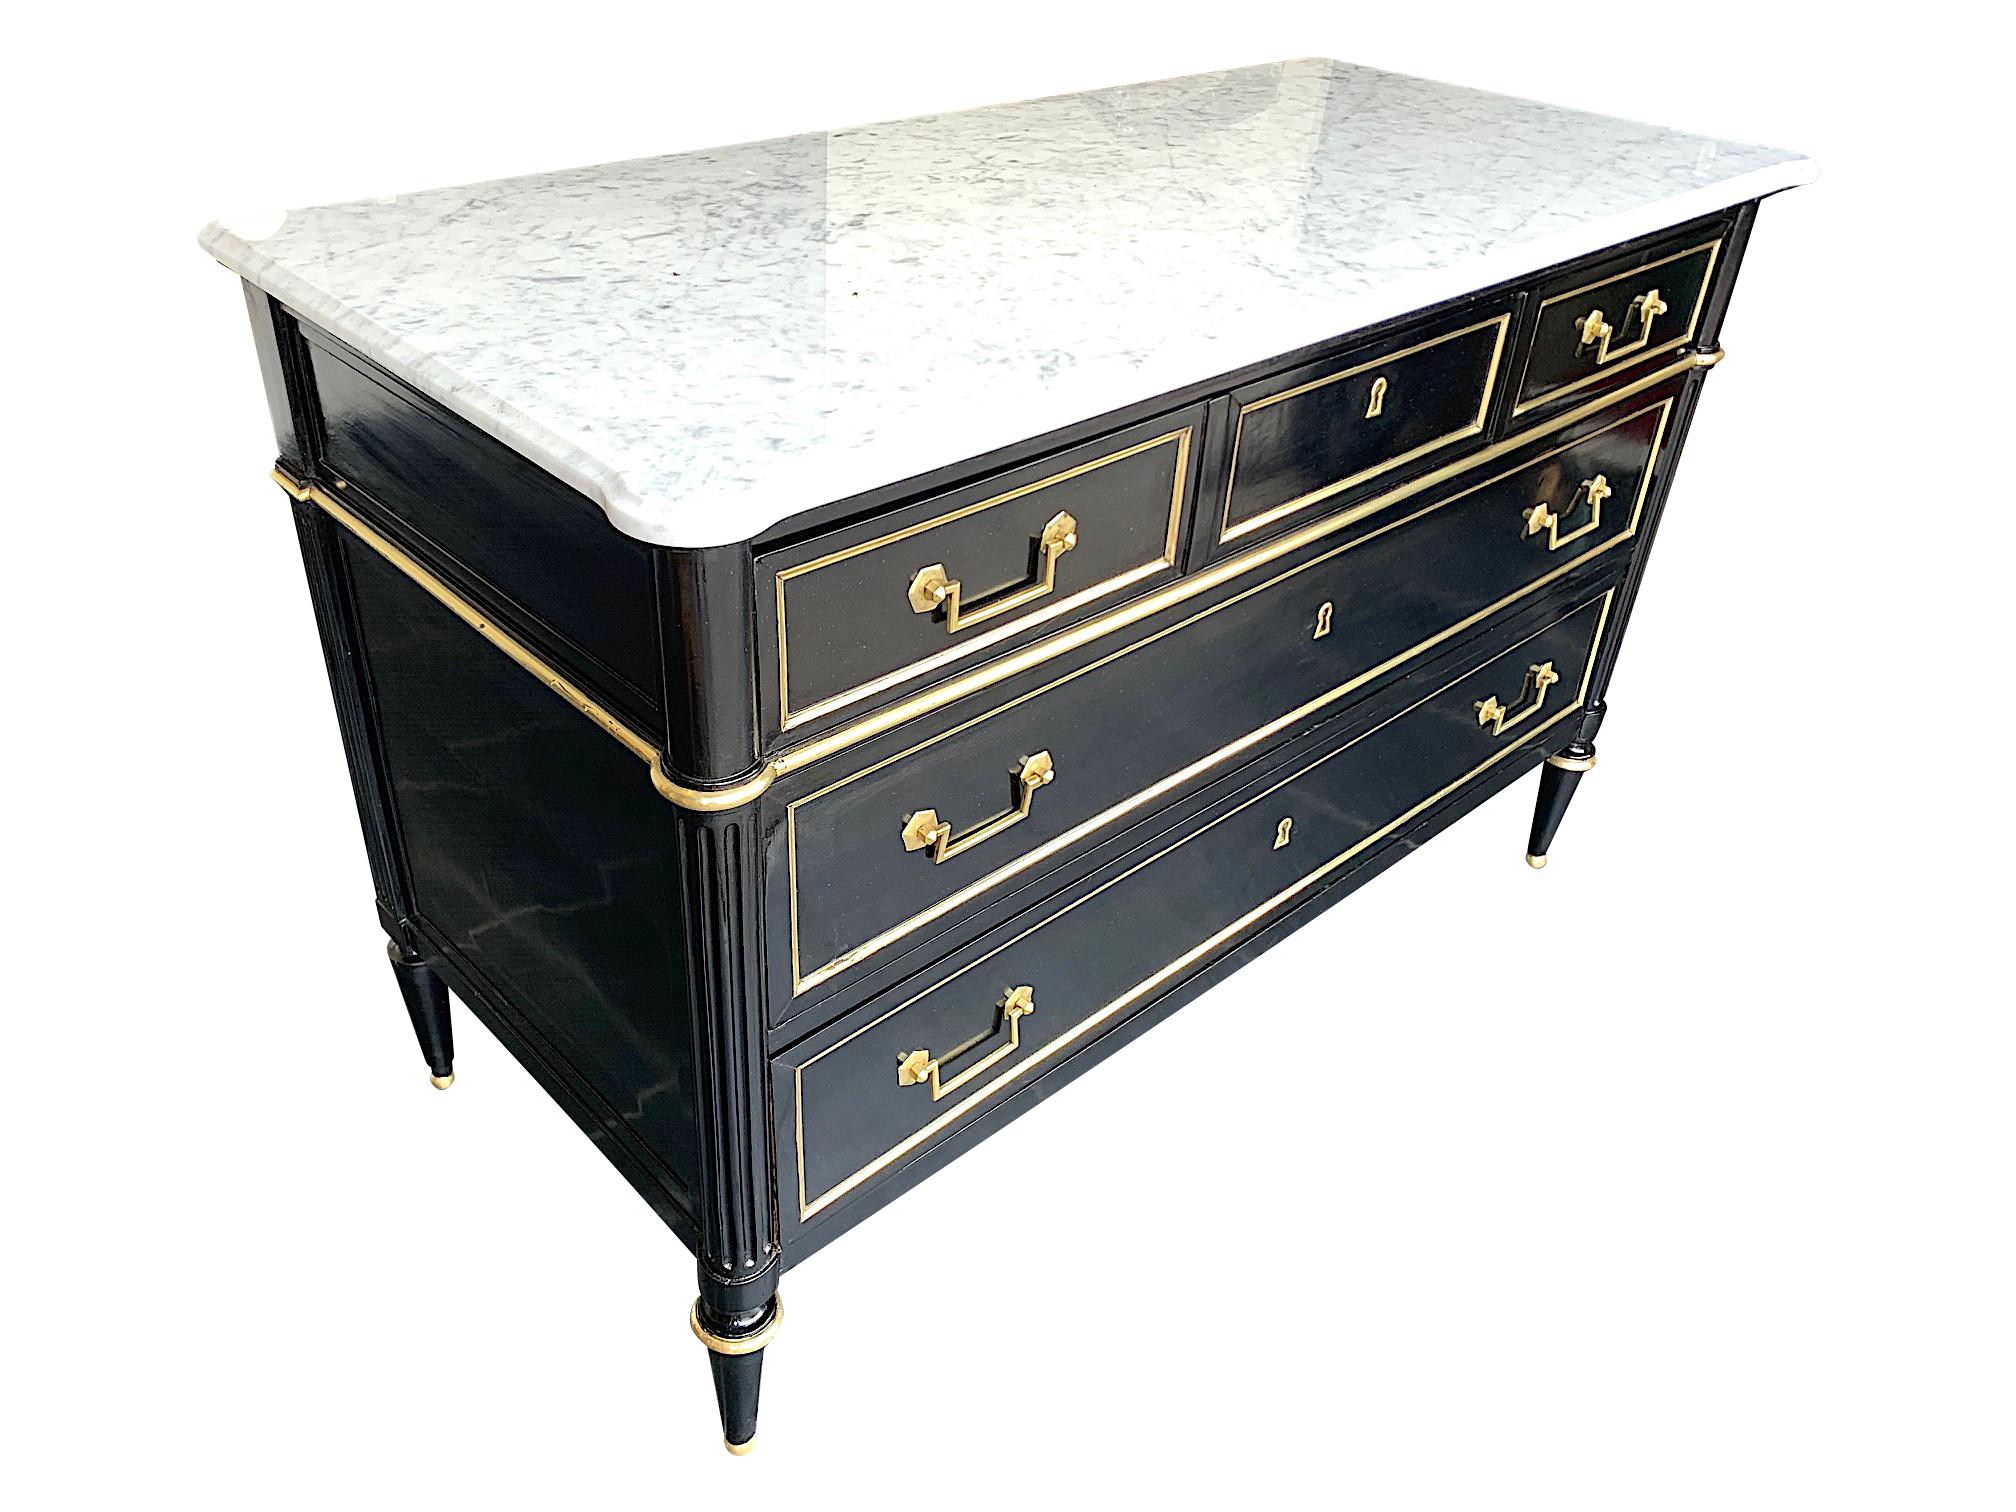 A stunning large sized, Louis XVI style ebonized three drawer commode with brass inlaid front, sides and feet with stunning new Carrara marble top with beveled edge and rounded front corners. With all original brass detail pieces and brass key for